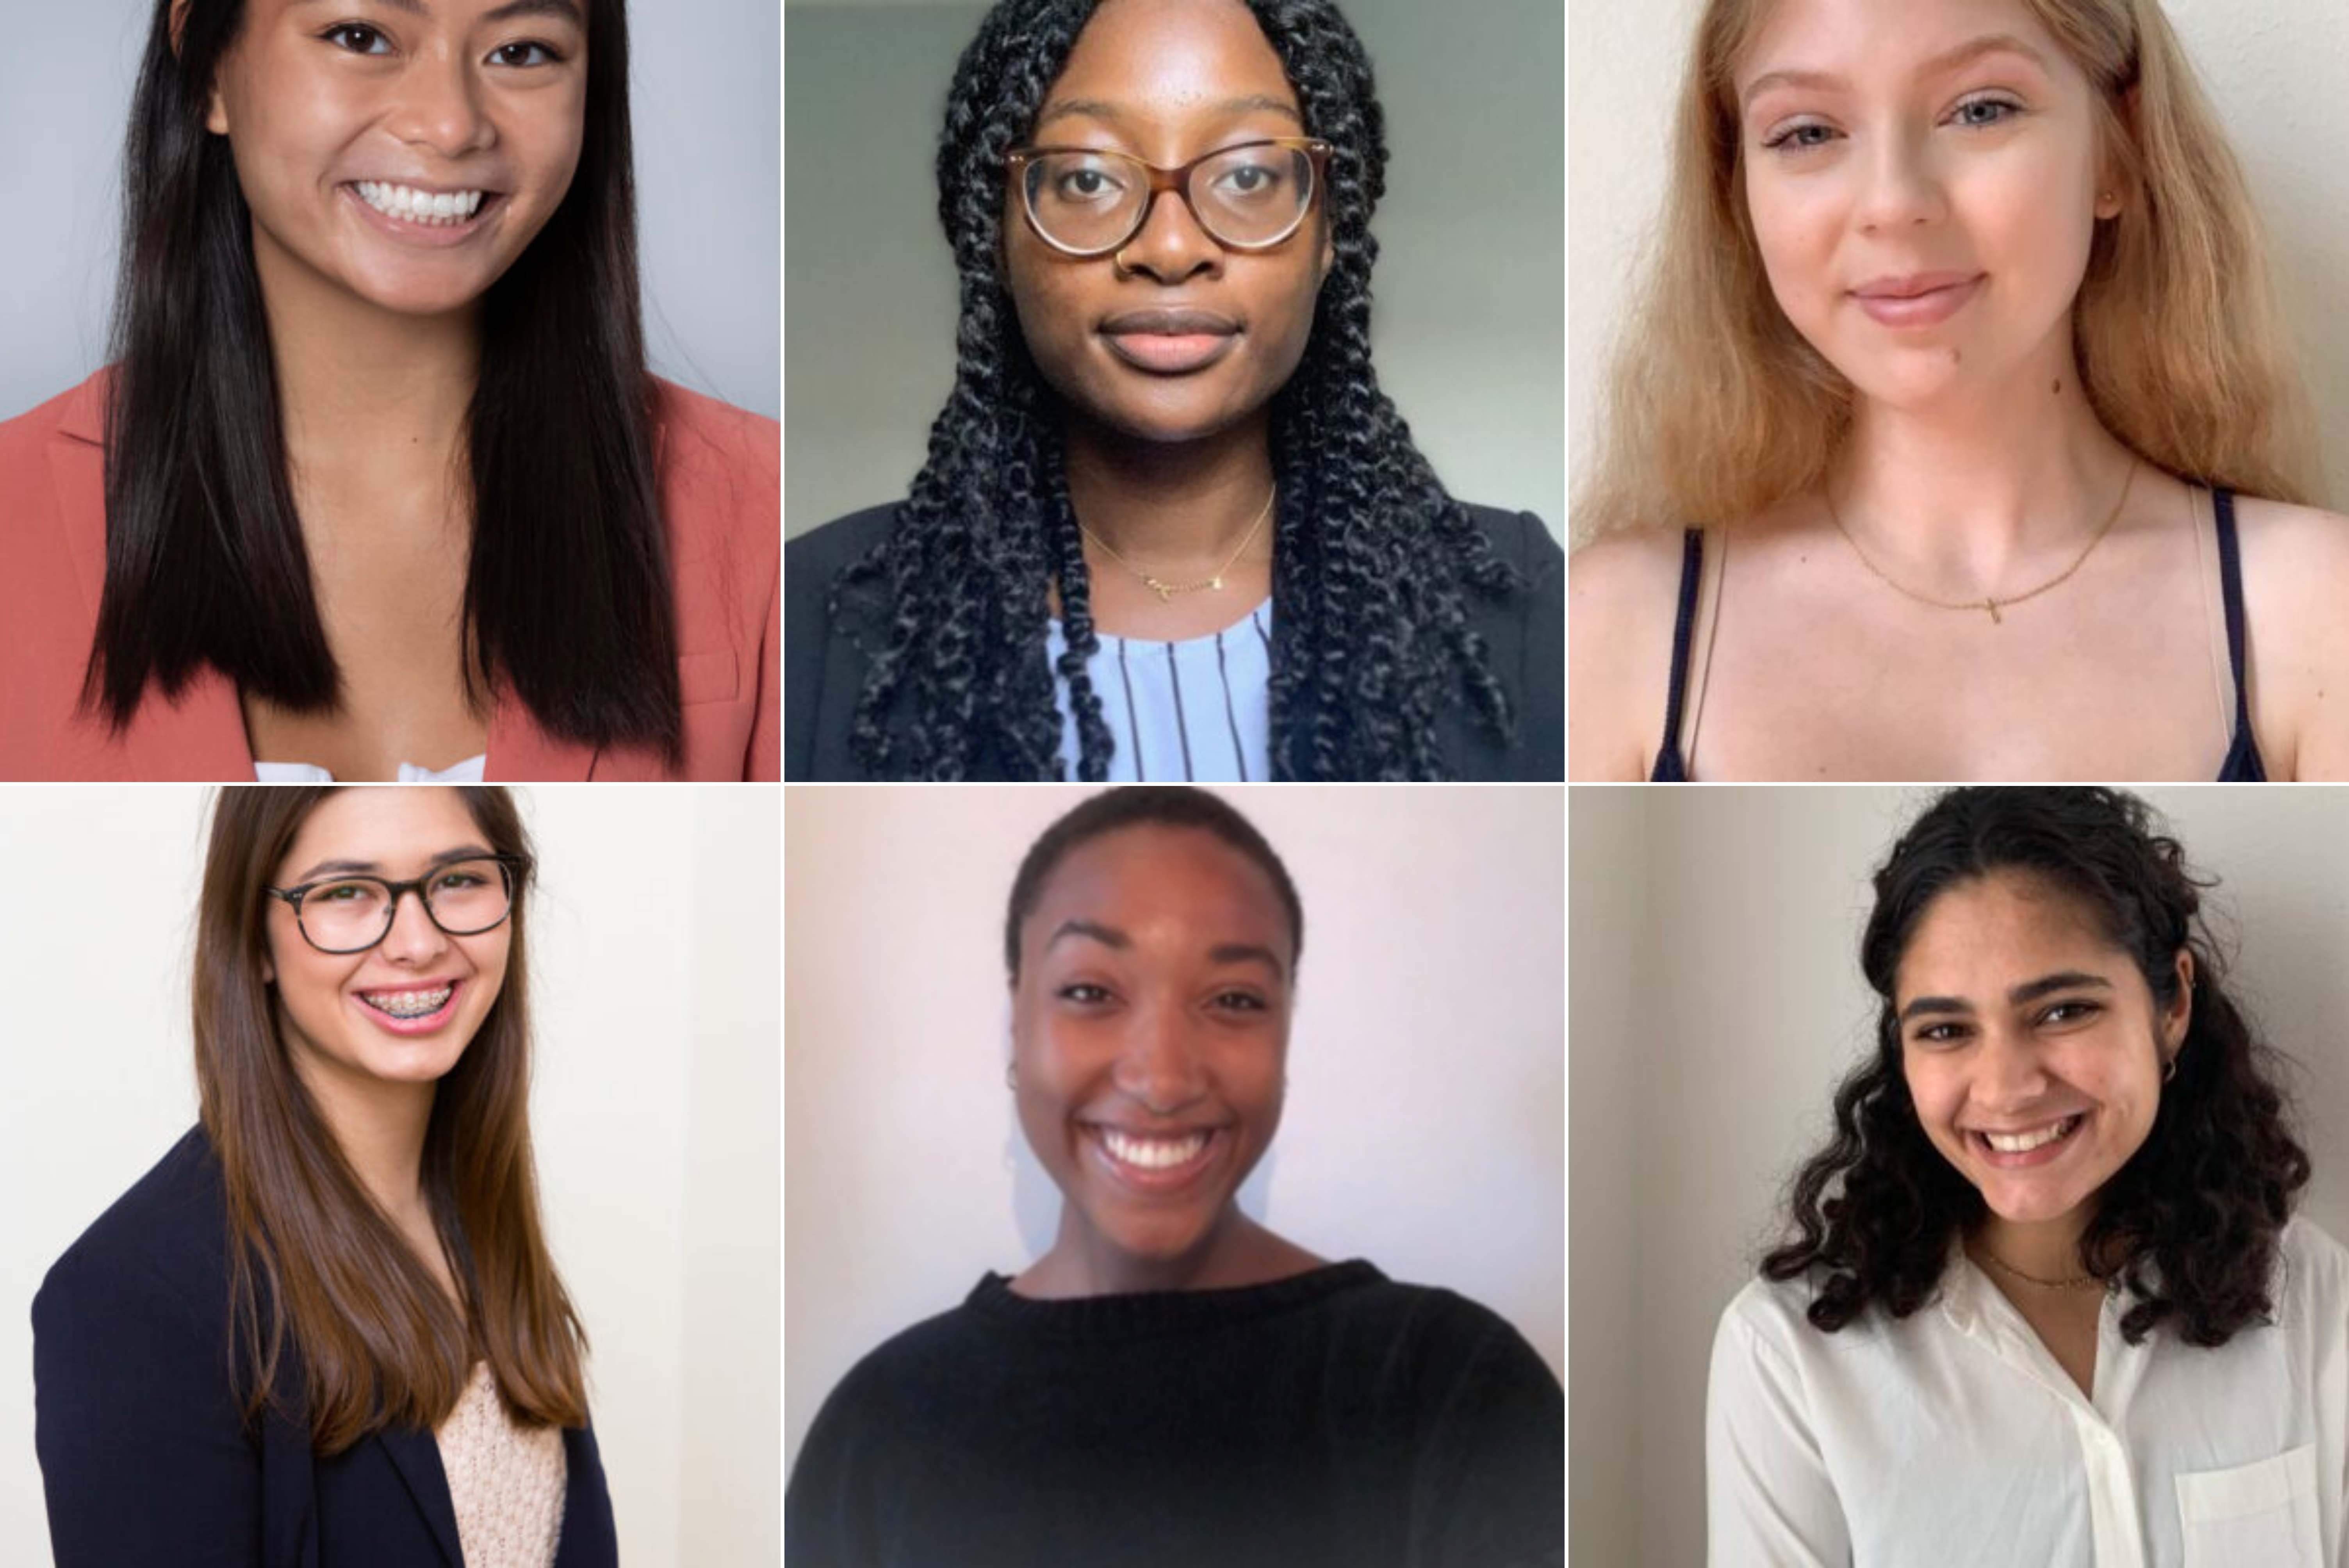 Photos of six of participants in the Feminist Summer Internships